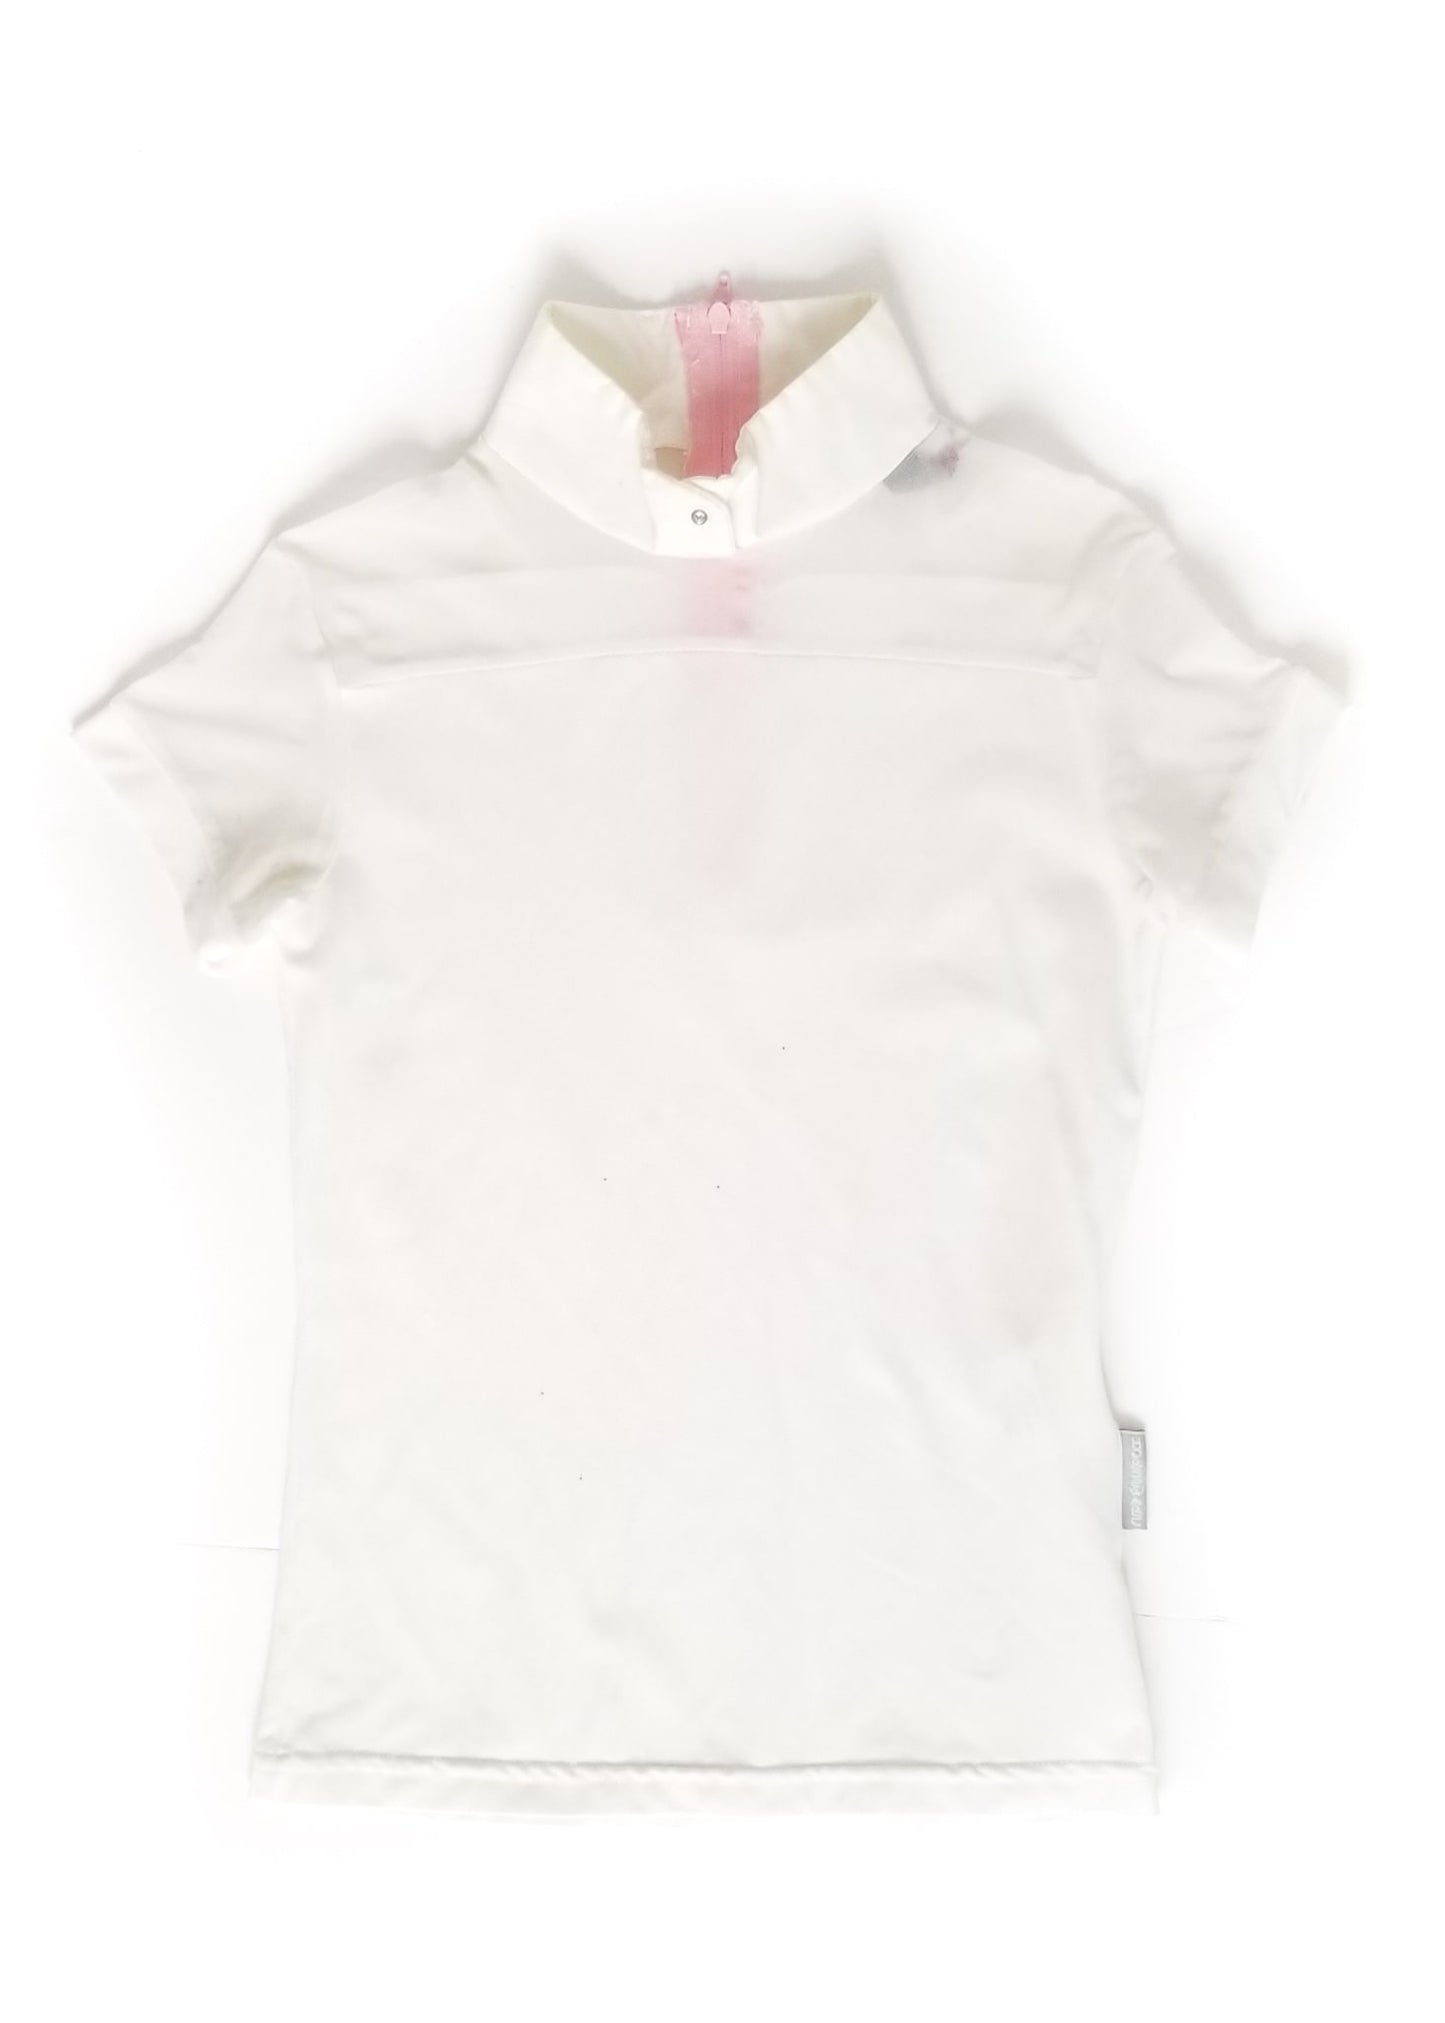 Horseware Ireland Kids Competition Short Sleeve Top - White - Youth 7/8